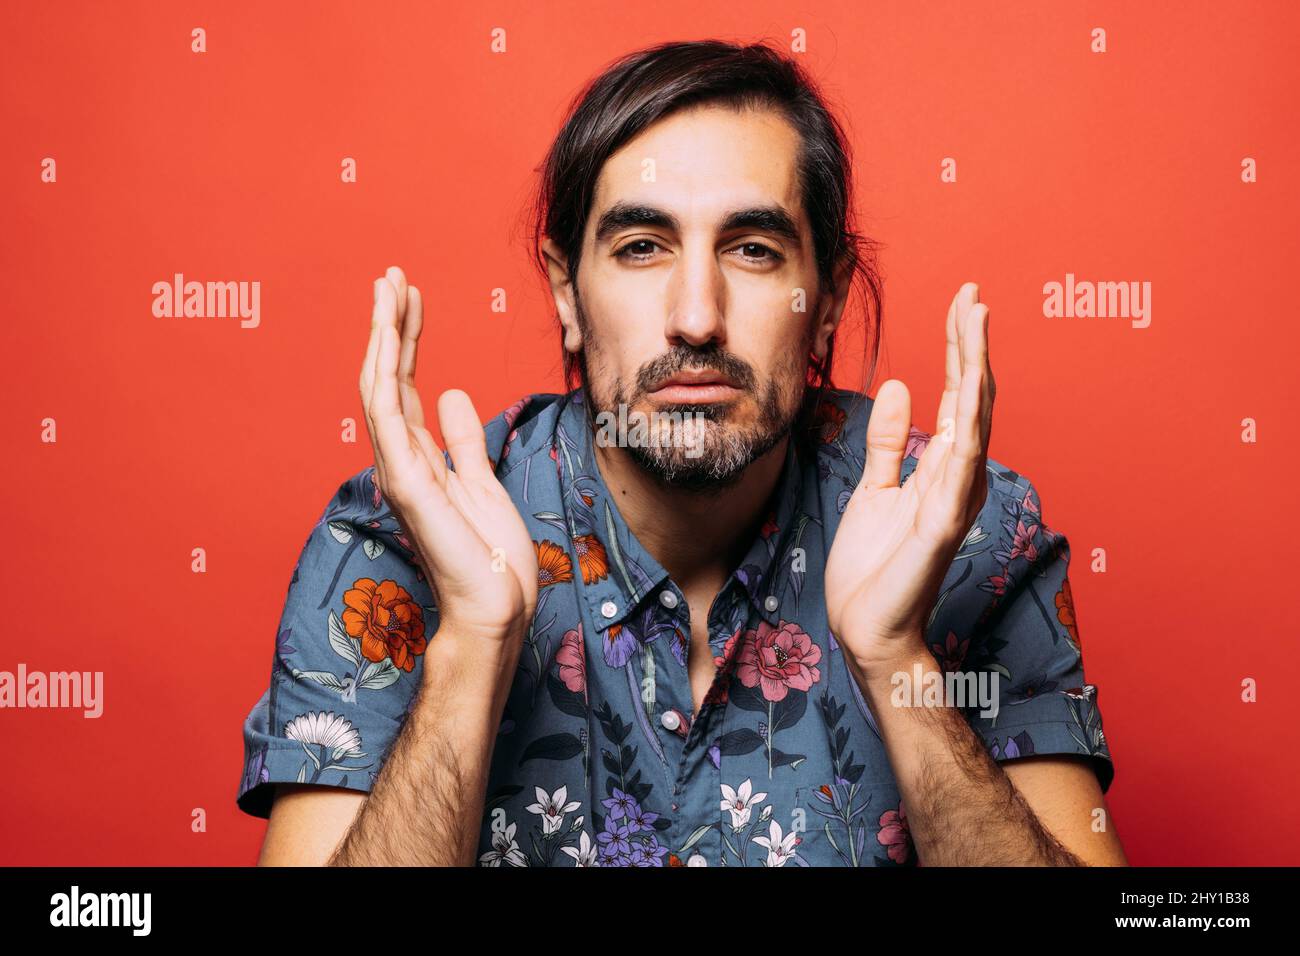 Bewildered man with beard in shirt looking at camera with raised hands while standing on red background in light studio Stock Photo